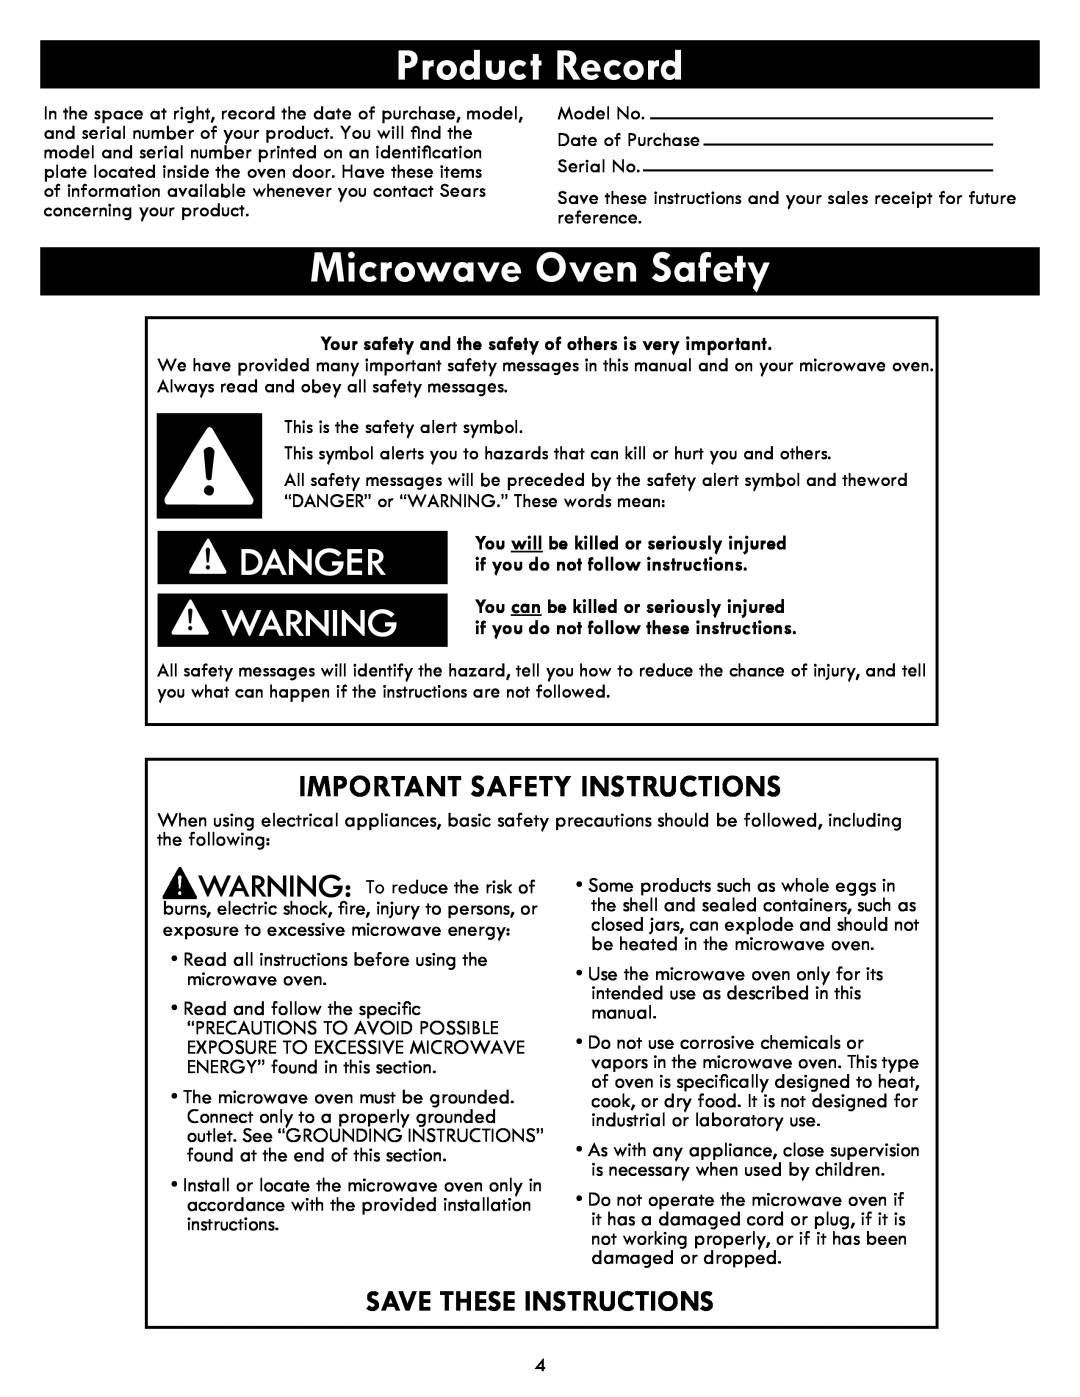 Kenmore 86019, 86013 Product Record, Microwave Oven Safety, Important Safety Instructions, Save These Instructions, Danger 